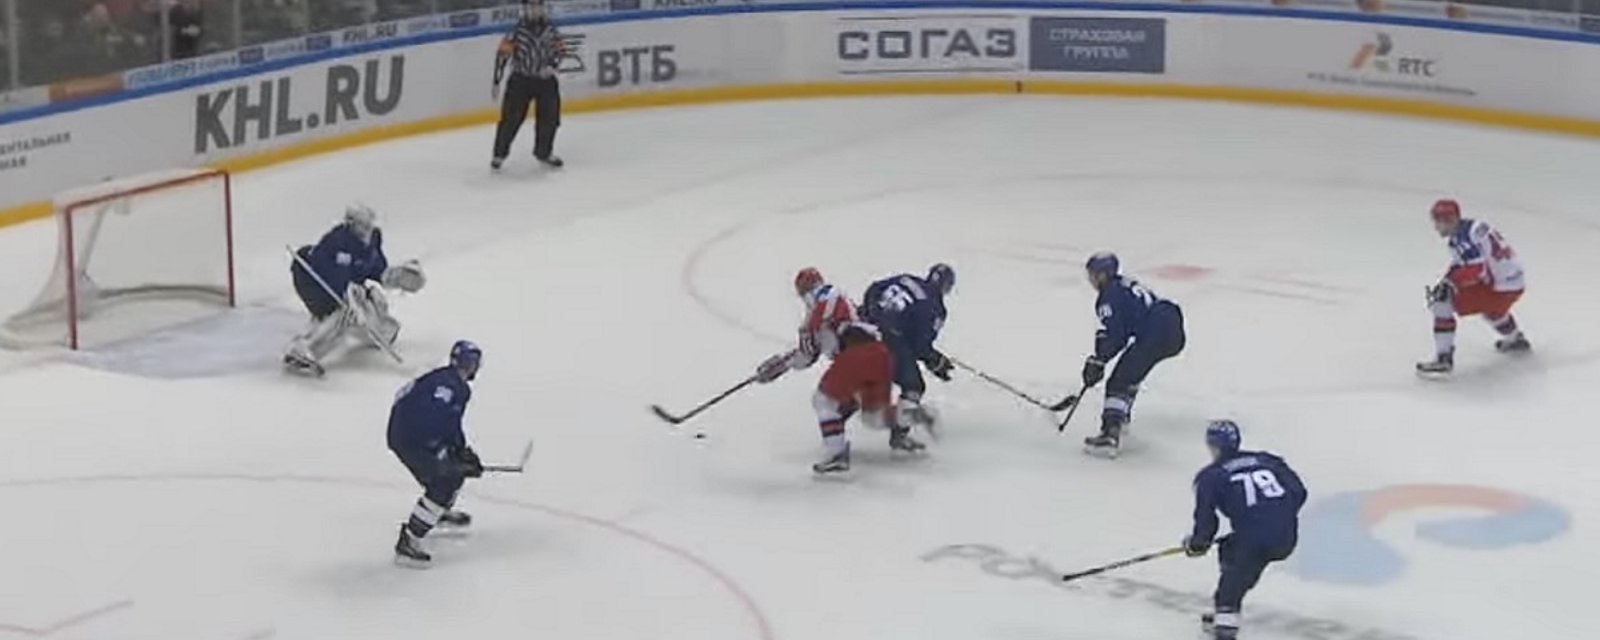 KHL defenseman shows off sick skills and he blows past three defenders for an incredible goal!